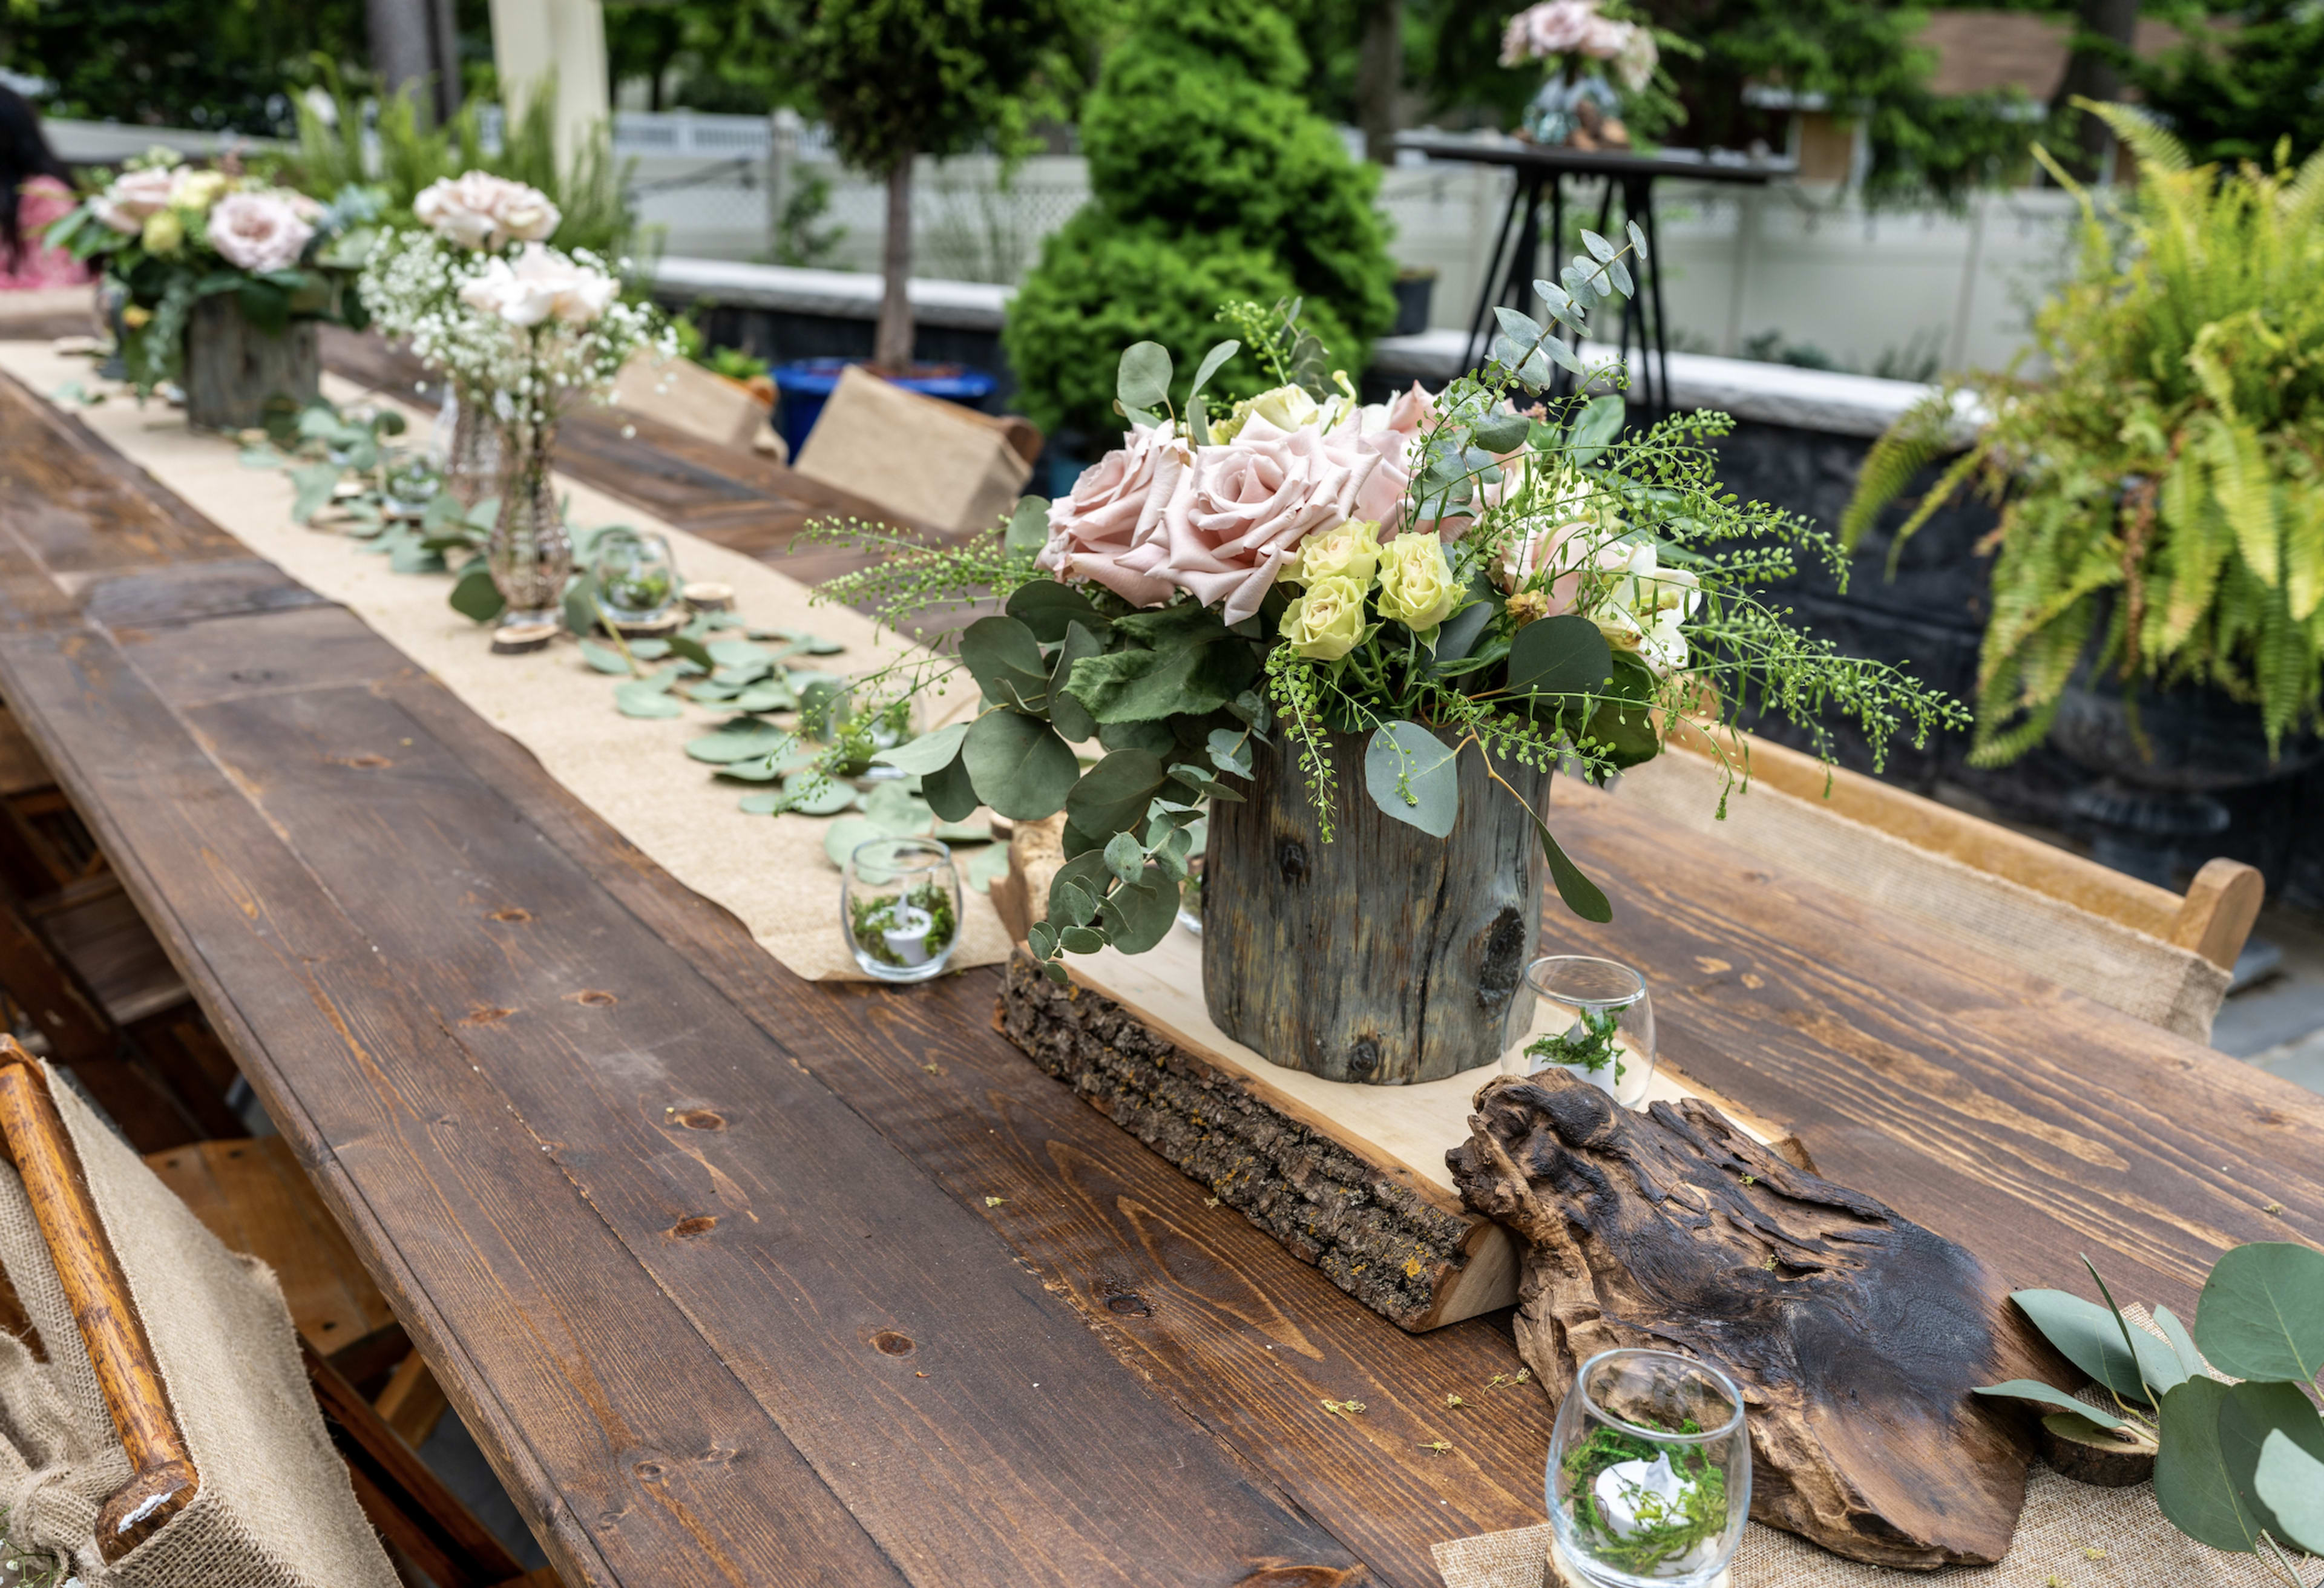 A wooden table topped with rustic vases filled with flowers in an outdoor garden.